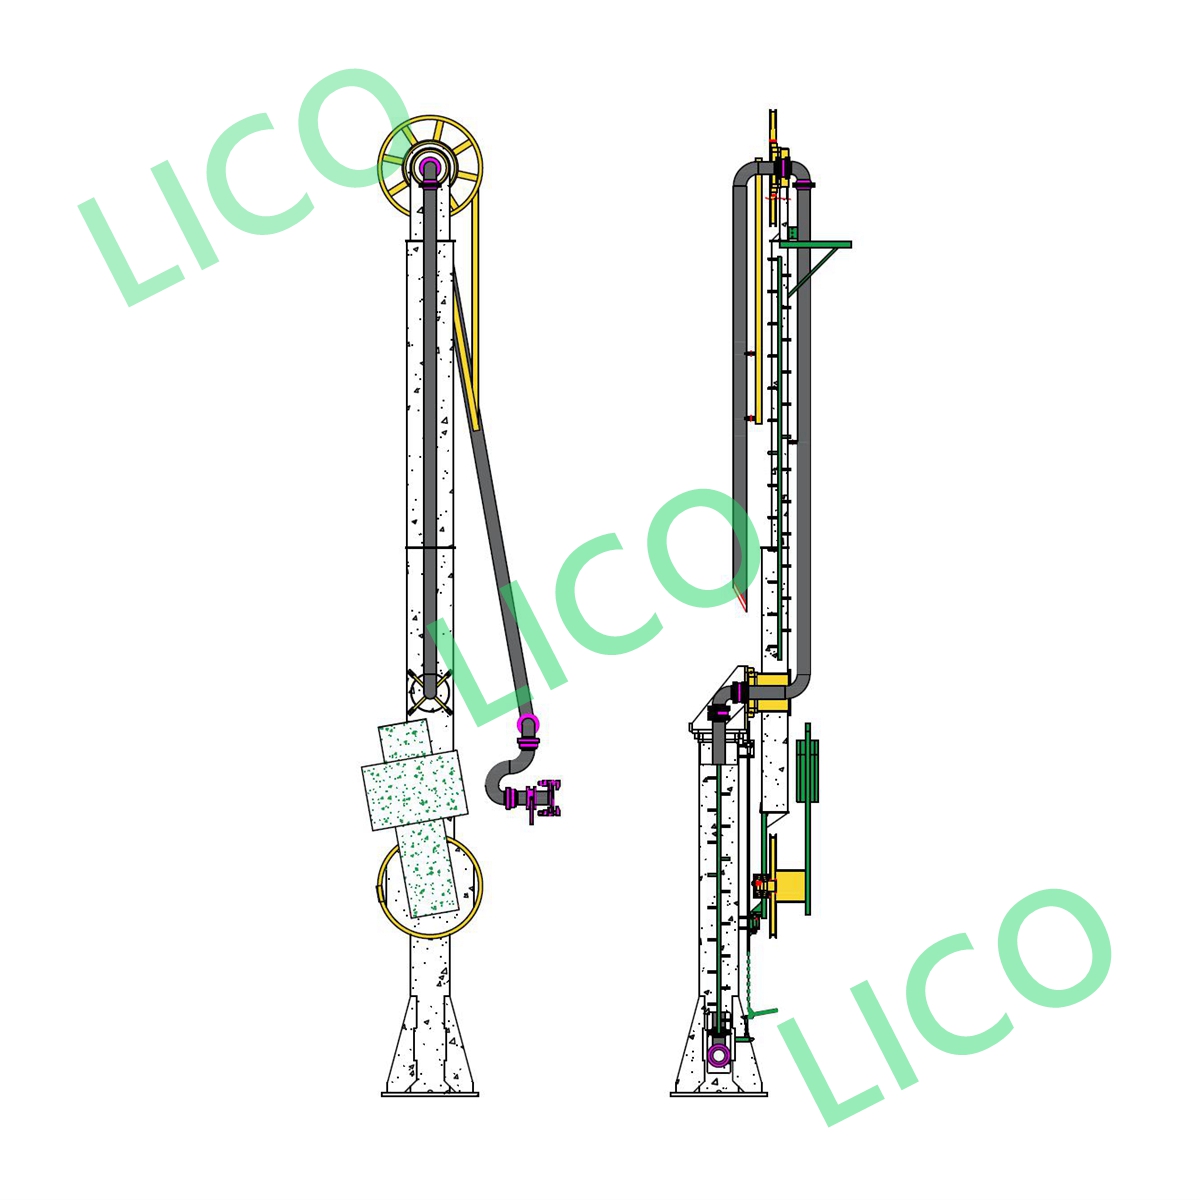 Fuel Industrial Top Loading Arm for Marine